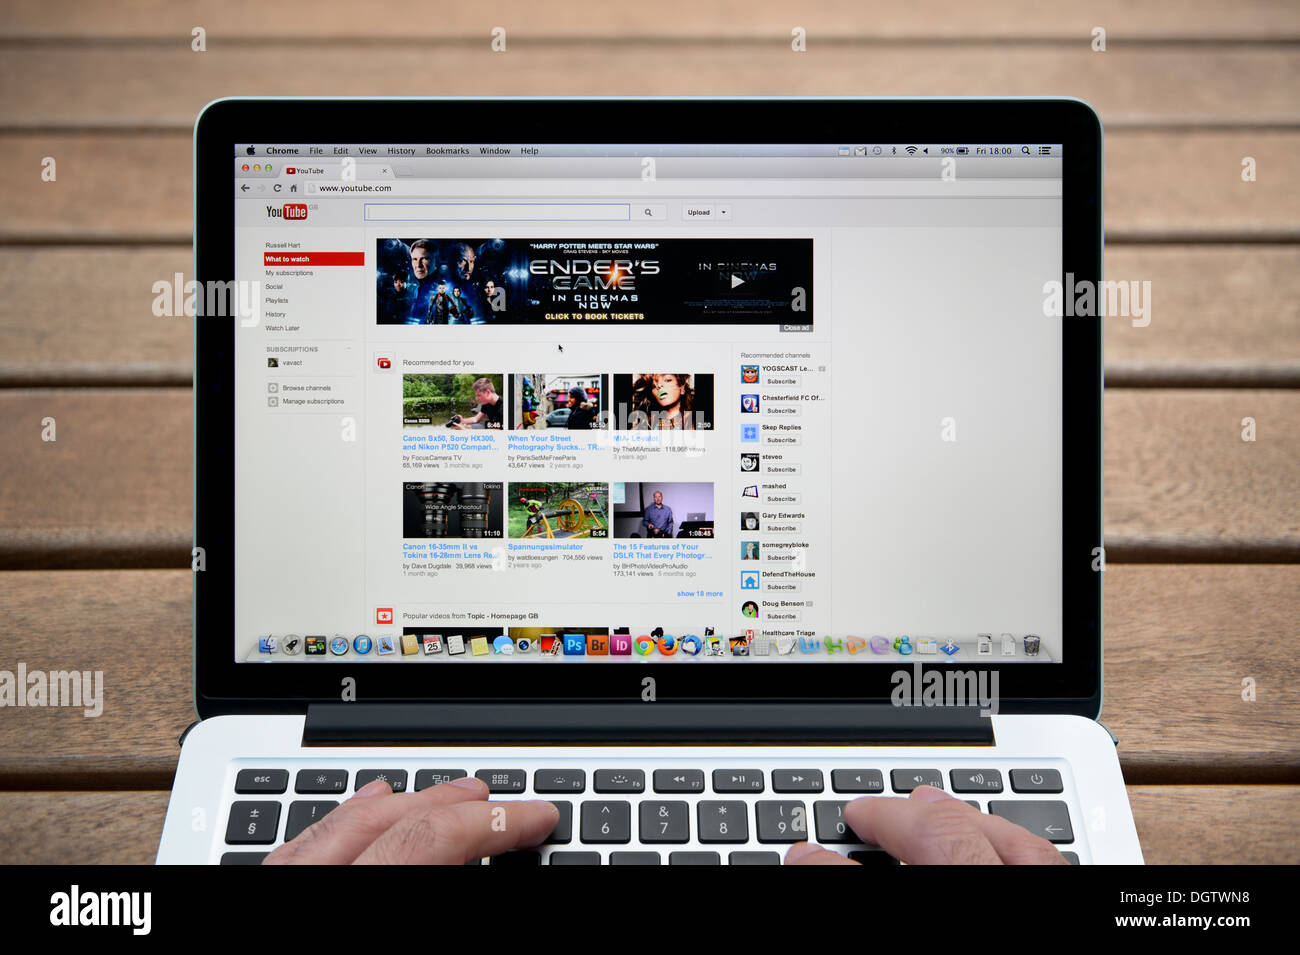 The YouTube website on a MacBook against a wooden bench outdoor background including a man's fingers (Editorial use only). Stock Photo